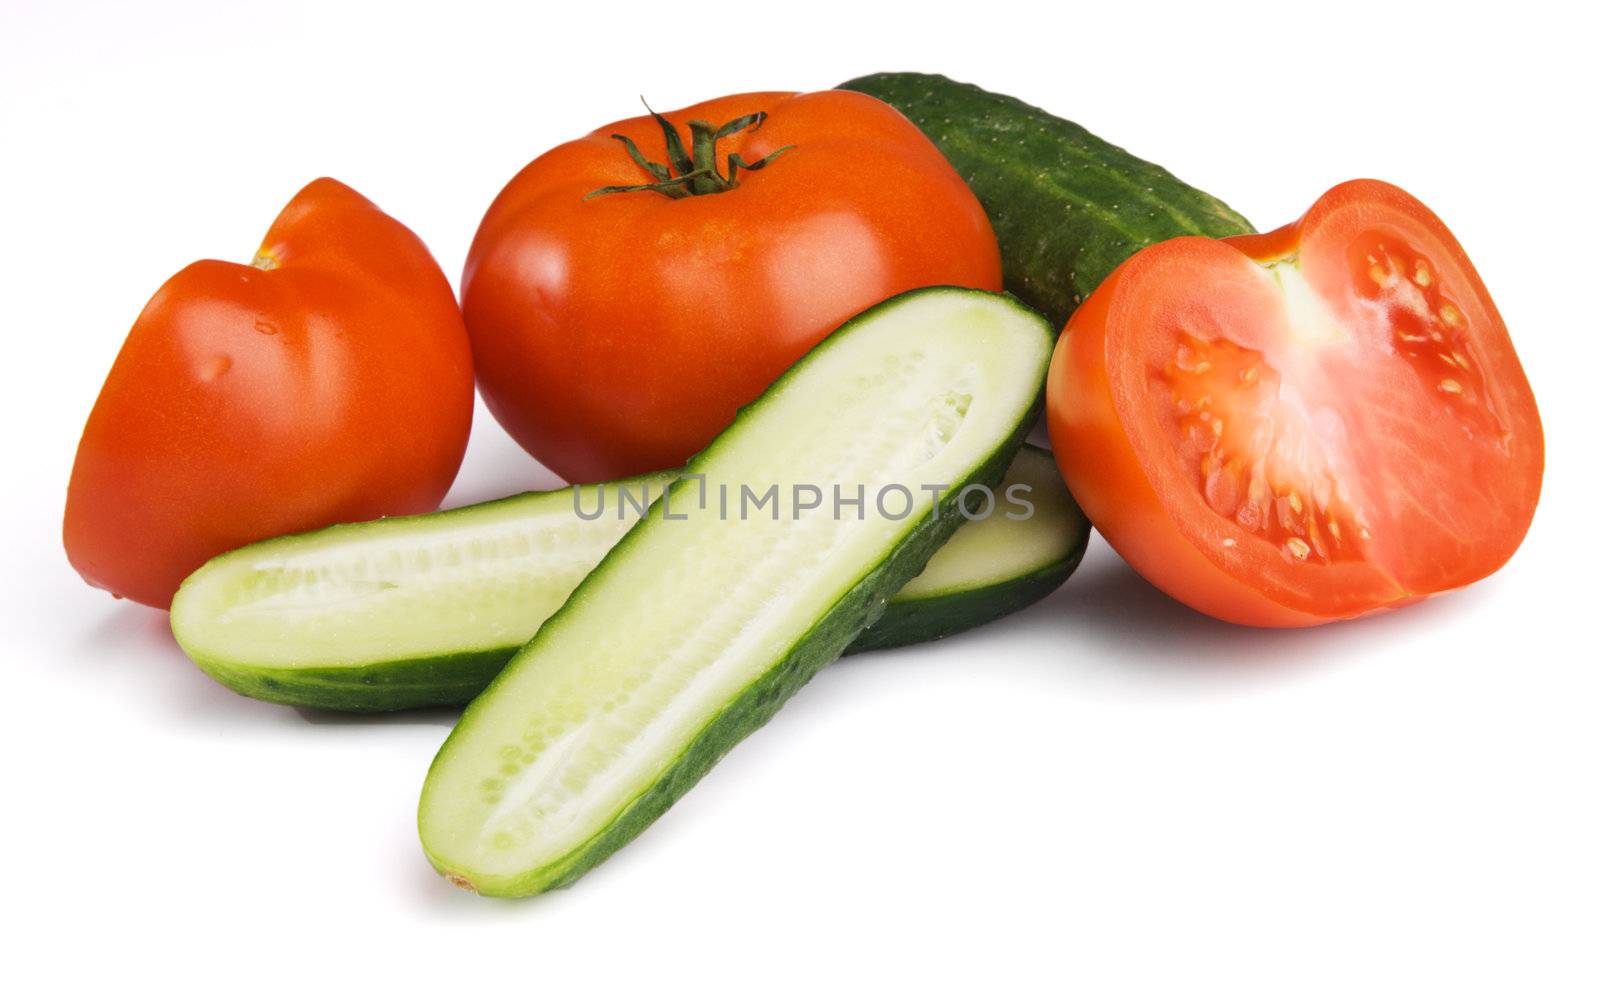 Tomatoes and cucumbers by Gdolgikh